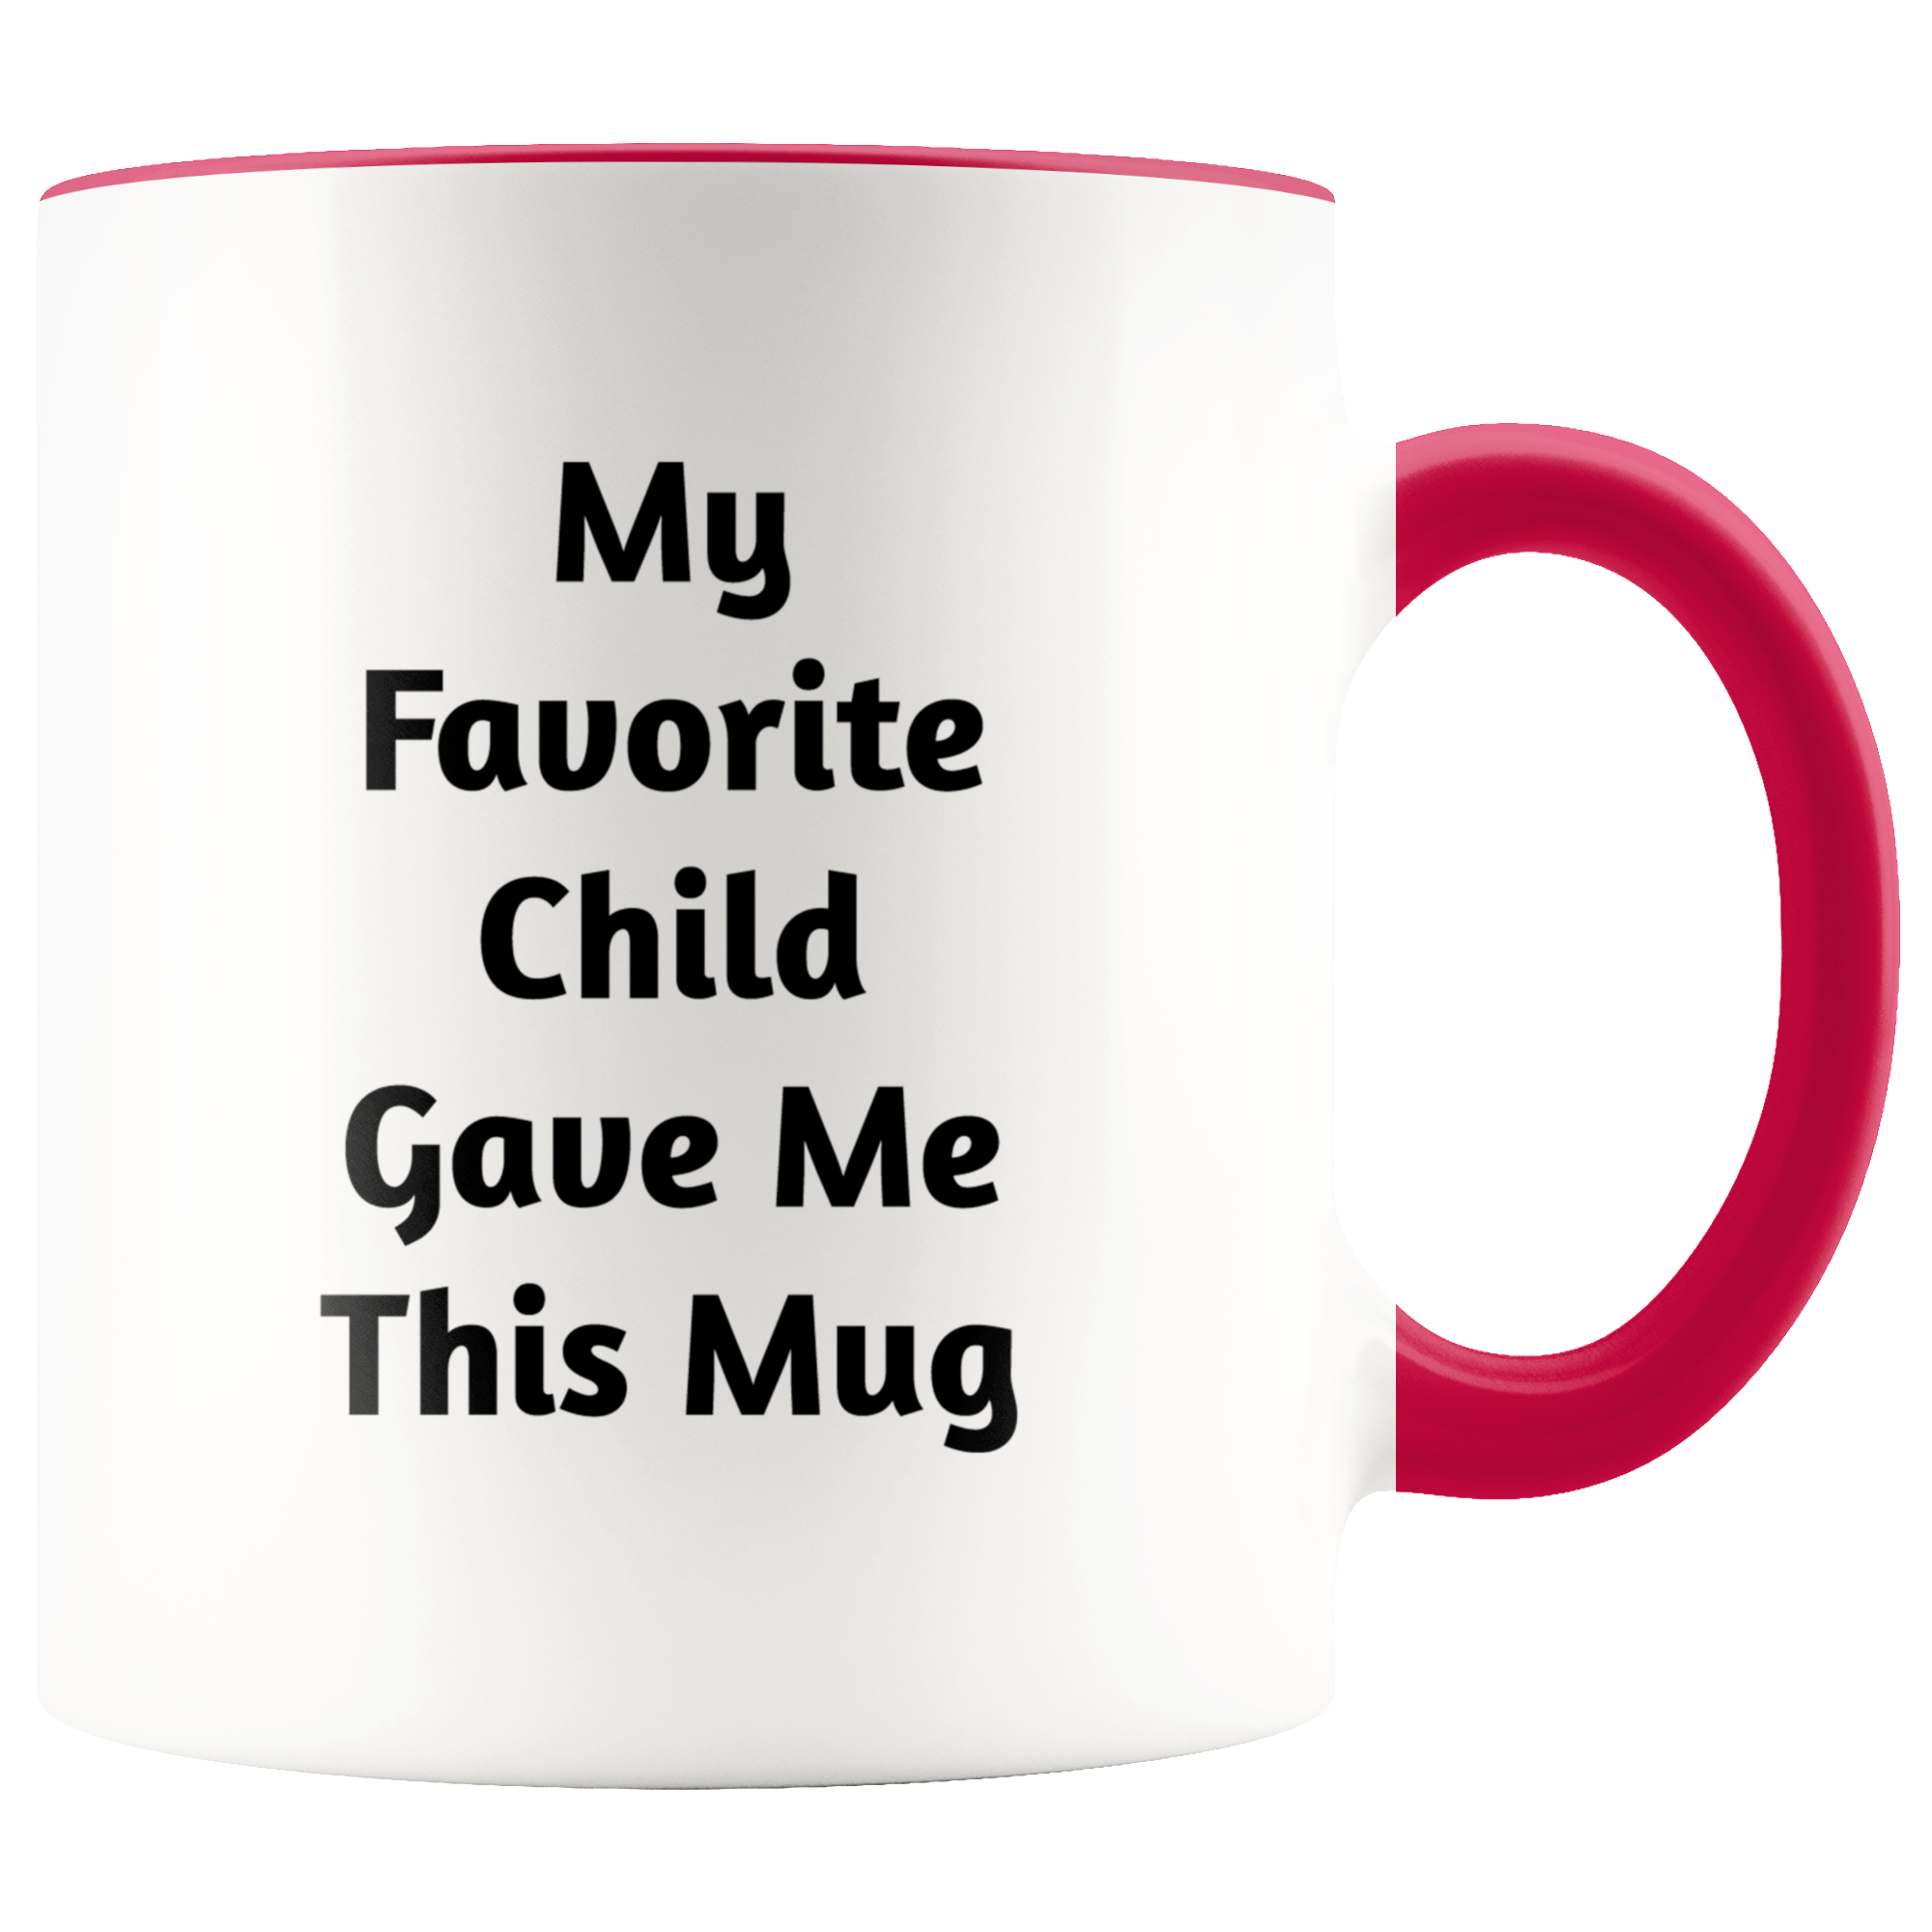 Funny gifts for mom, cool mothers day gifts - Ceramic Mug ...